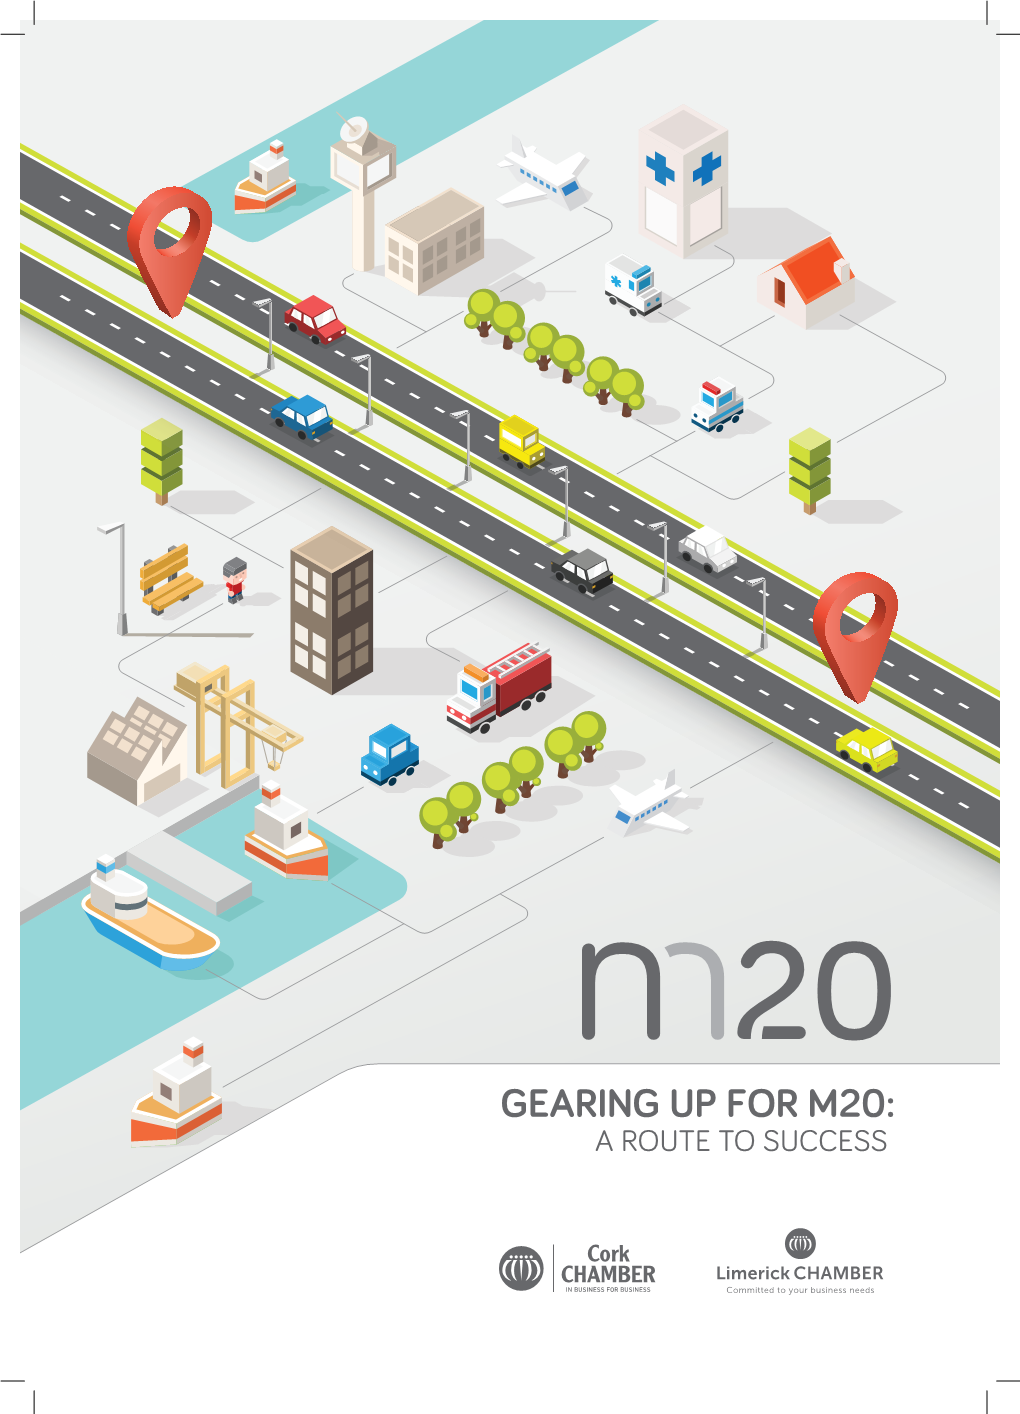 Gearing up for M20: a Route to Success